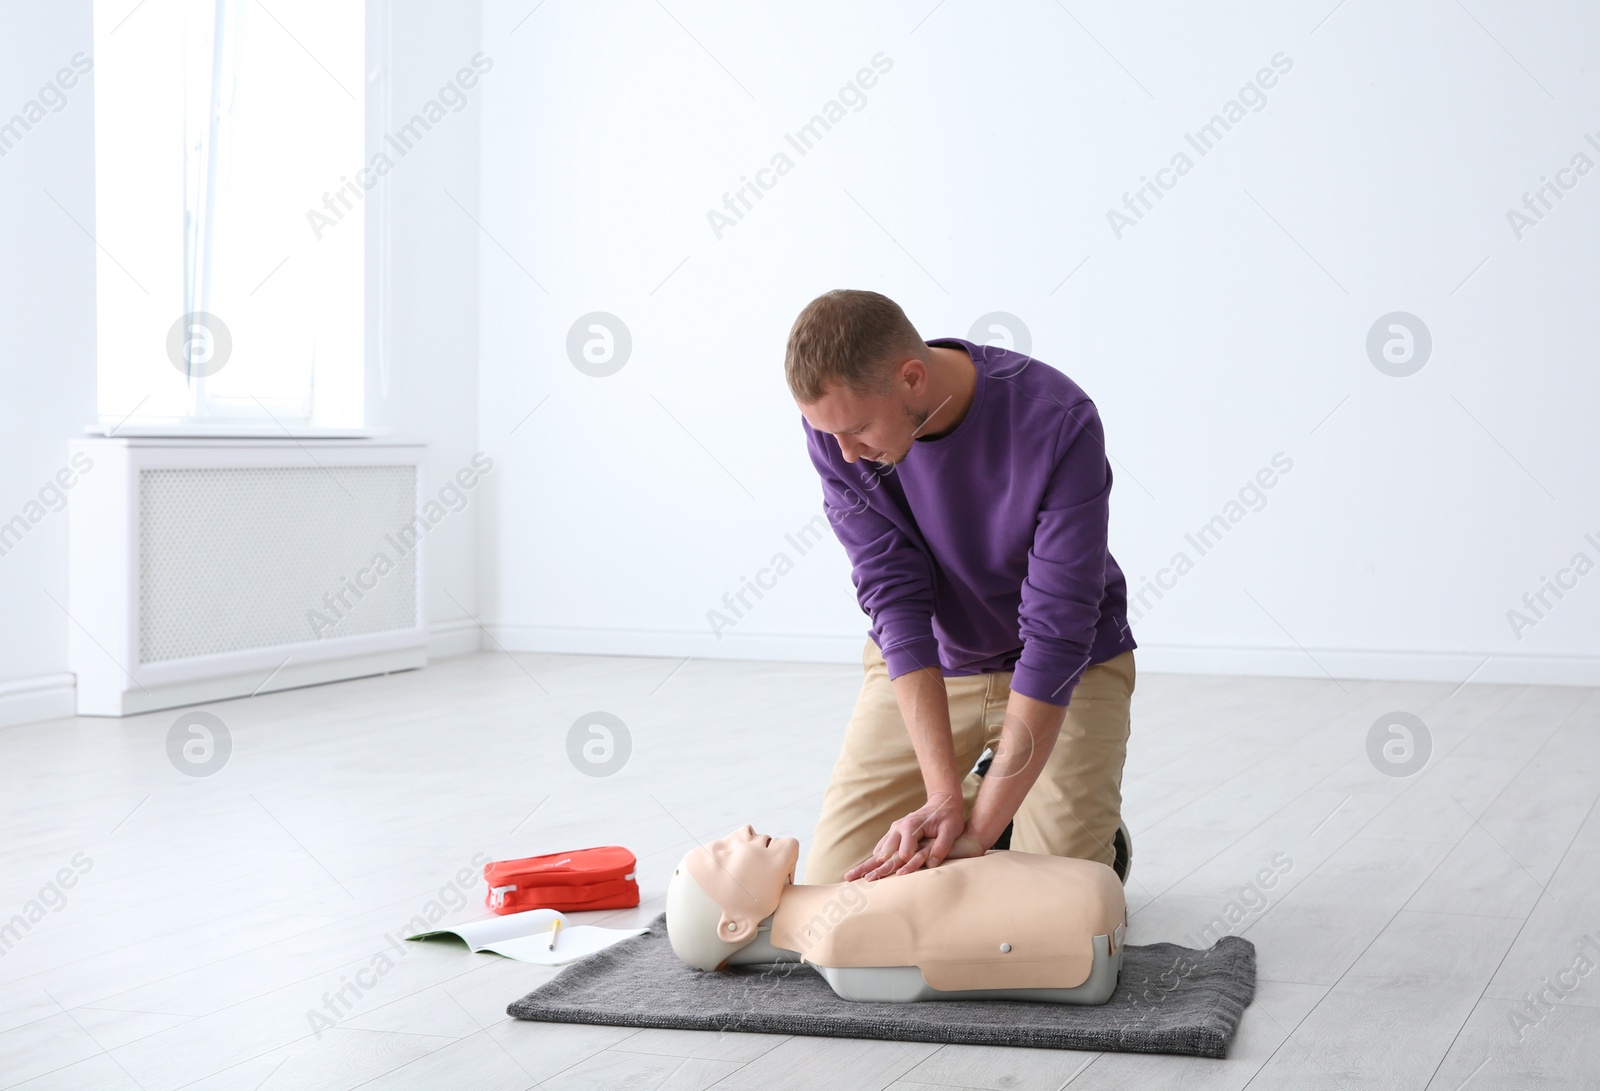 Photo of Man practicing first aid on mannequin indoors